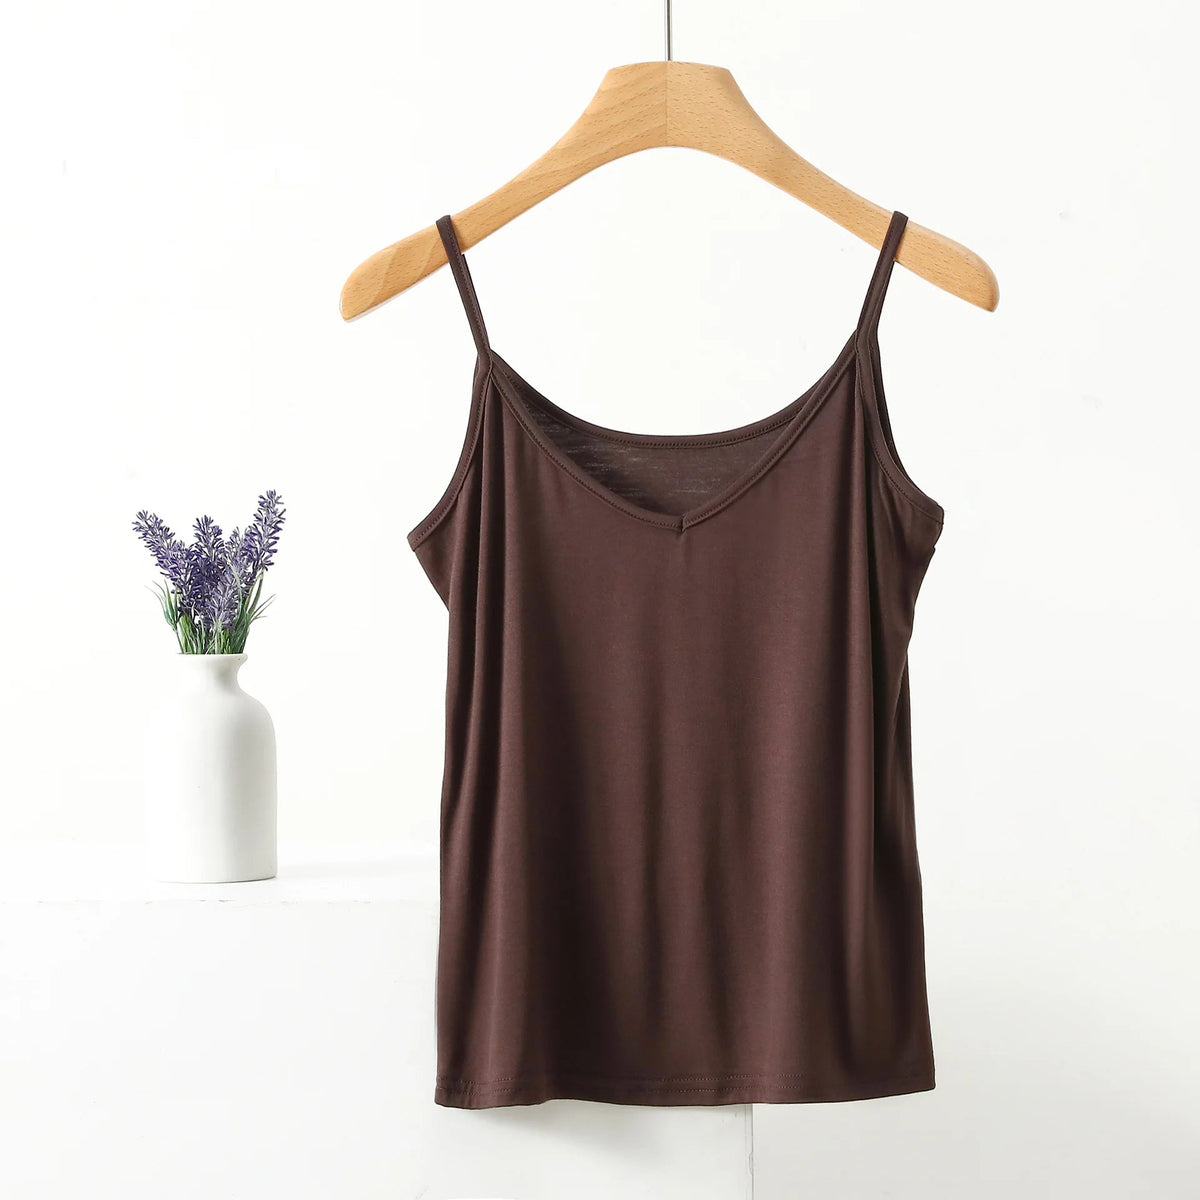 Spiced Pear V-Neck Camisole Viscose Womens Lounge Tank Top | Hypoallergenic - Allergy Friendly - Naturally Free